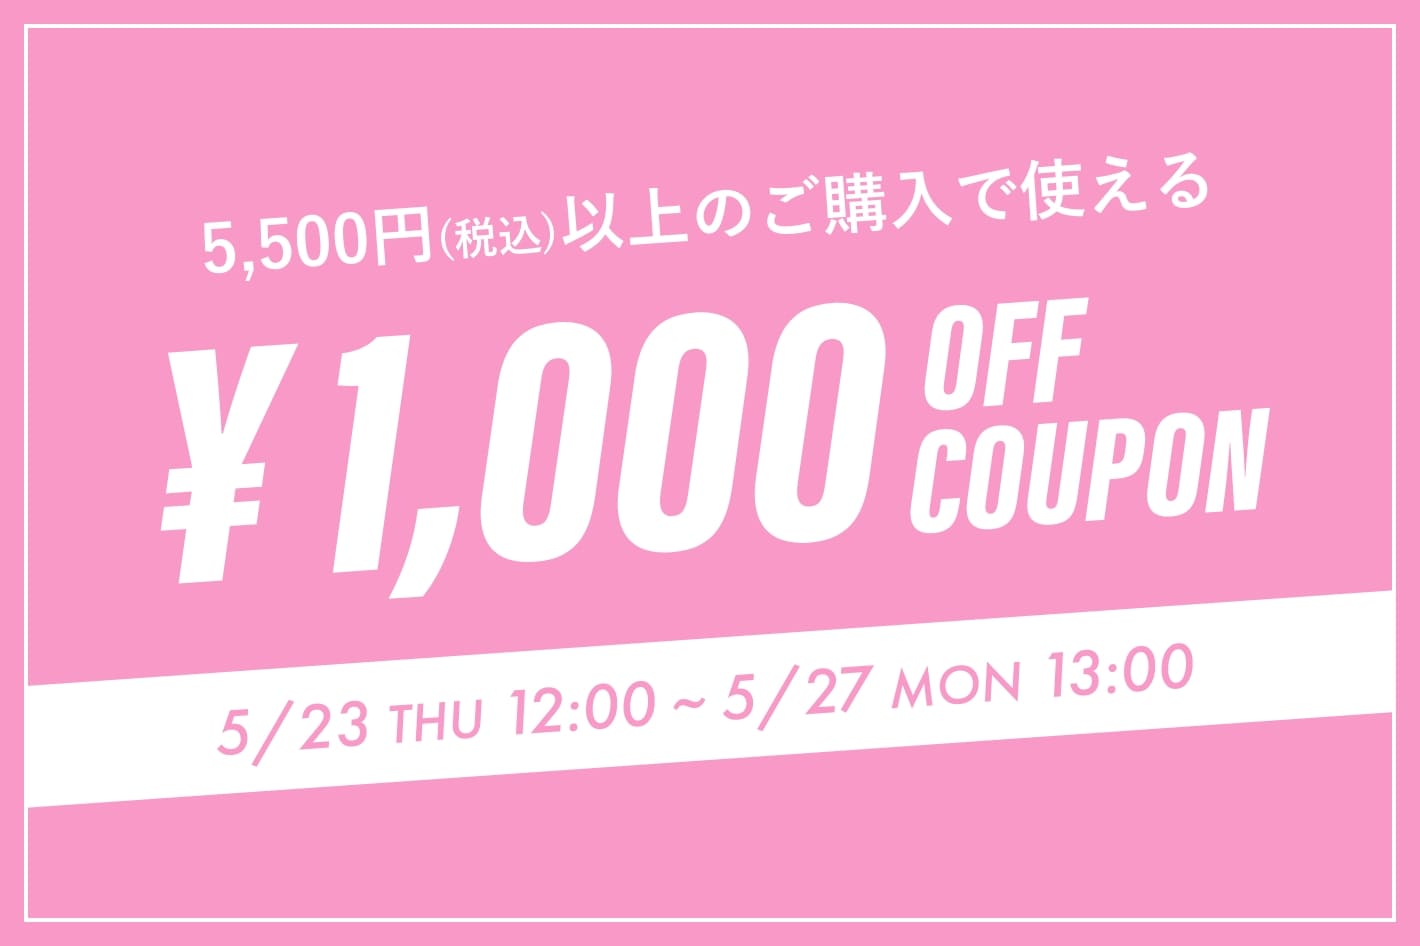 OUTLET 【PALGROUP OUTLET限定】1,000円OFFクーポンキャンペーン開催！